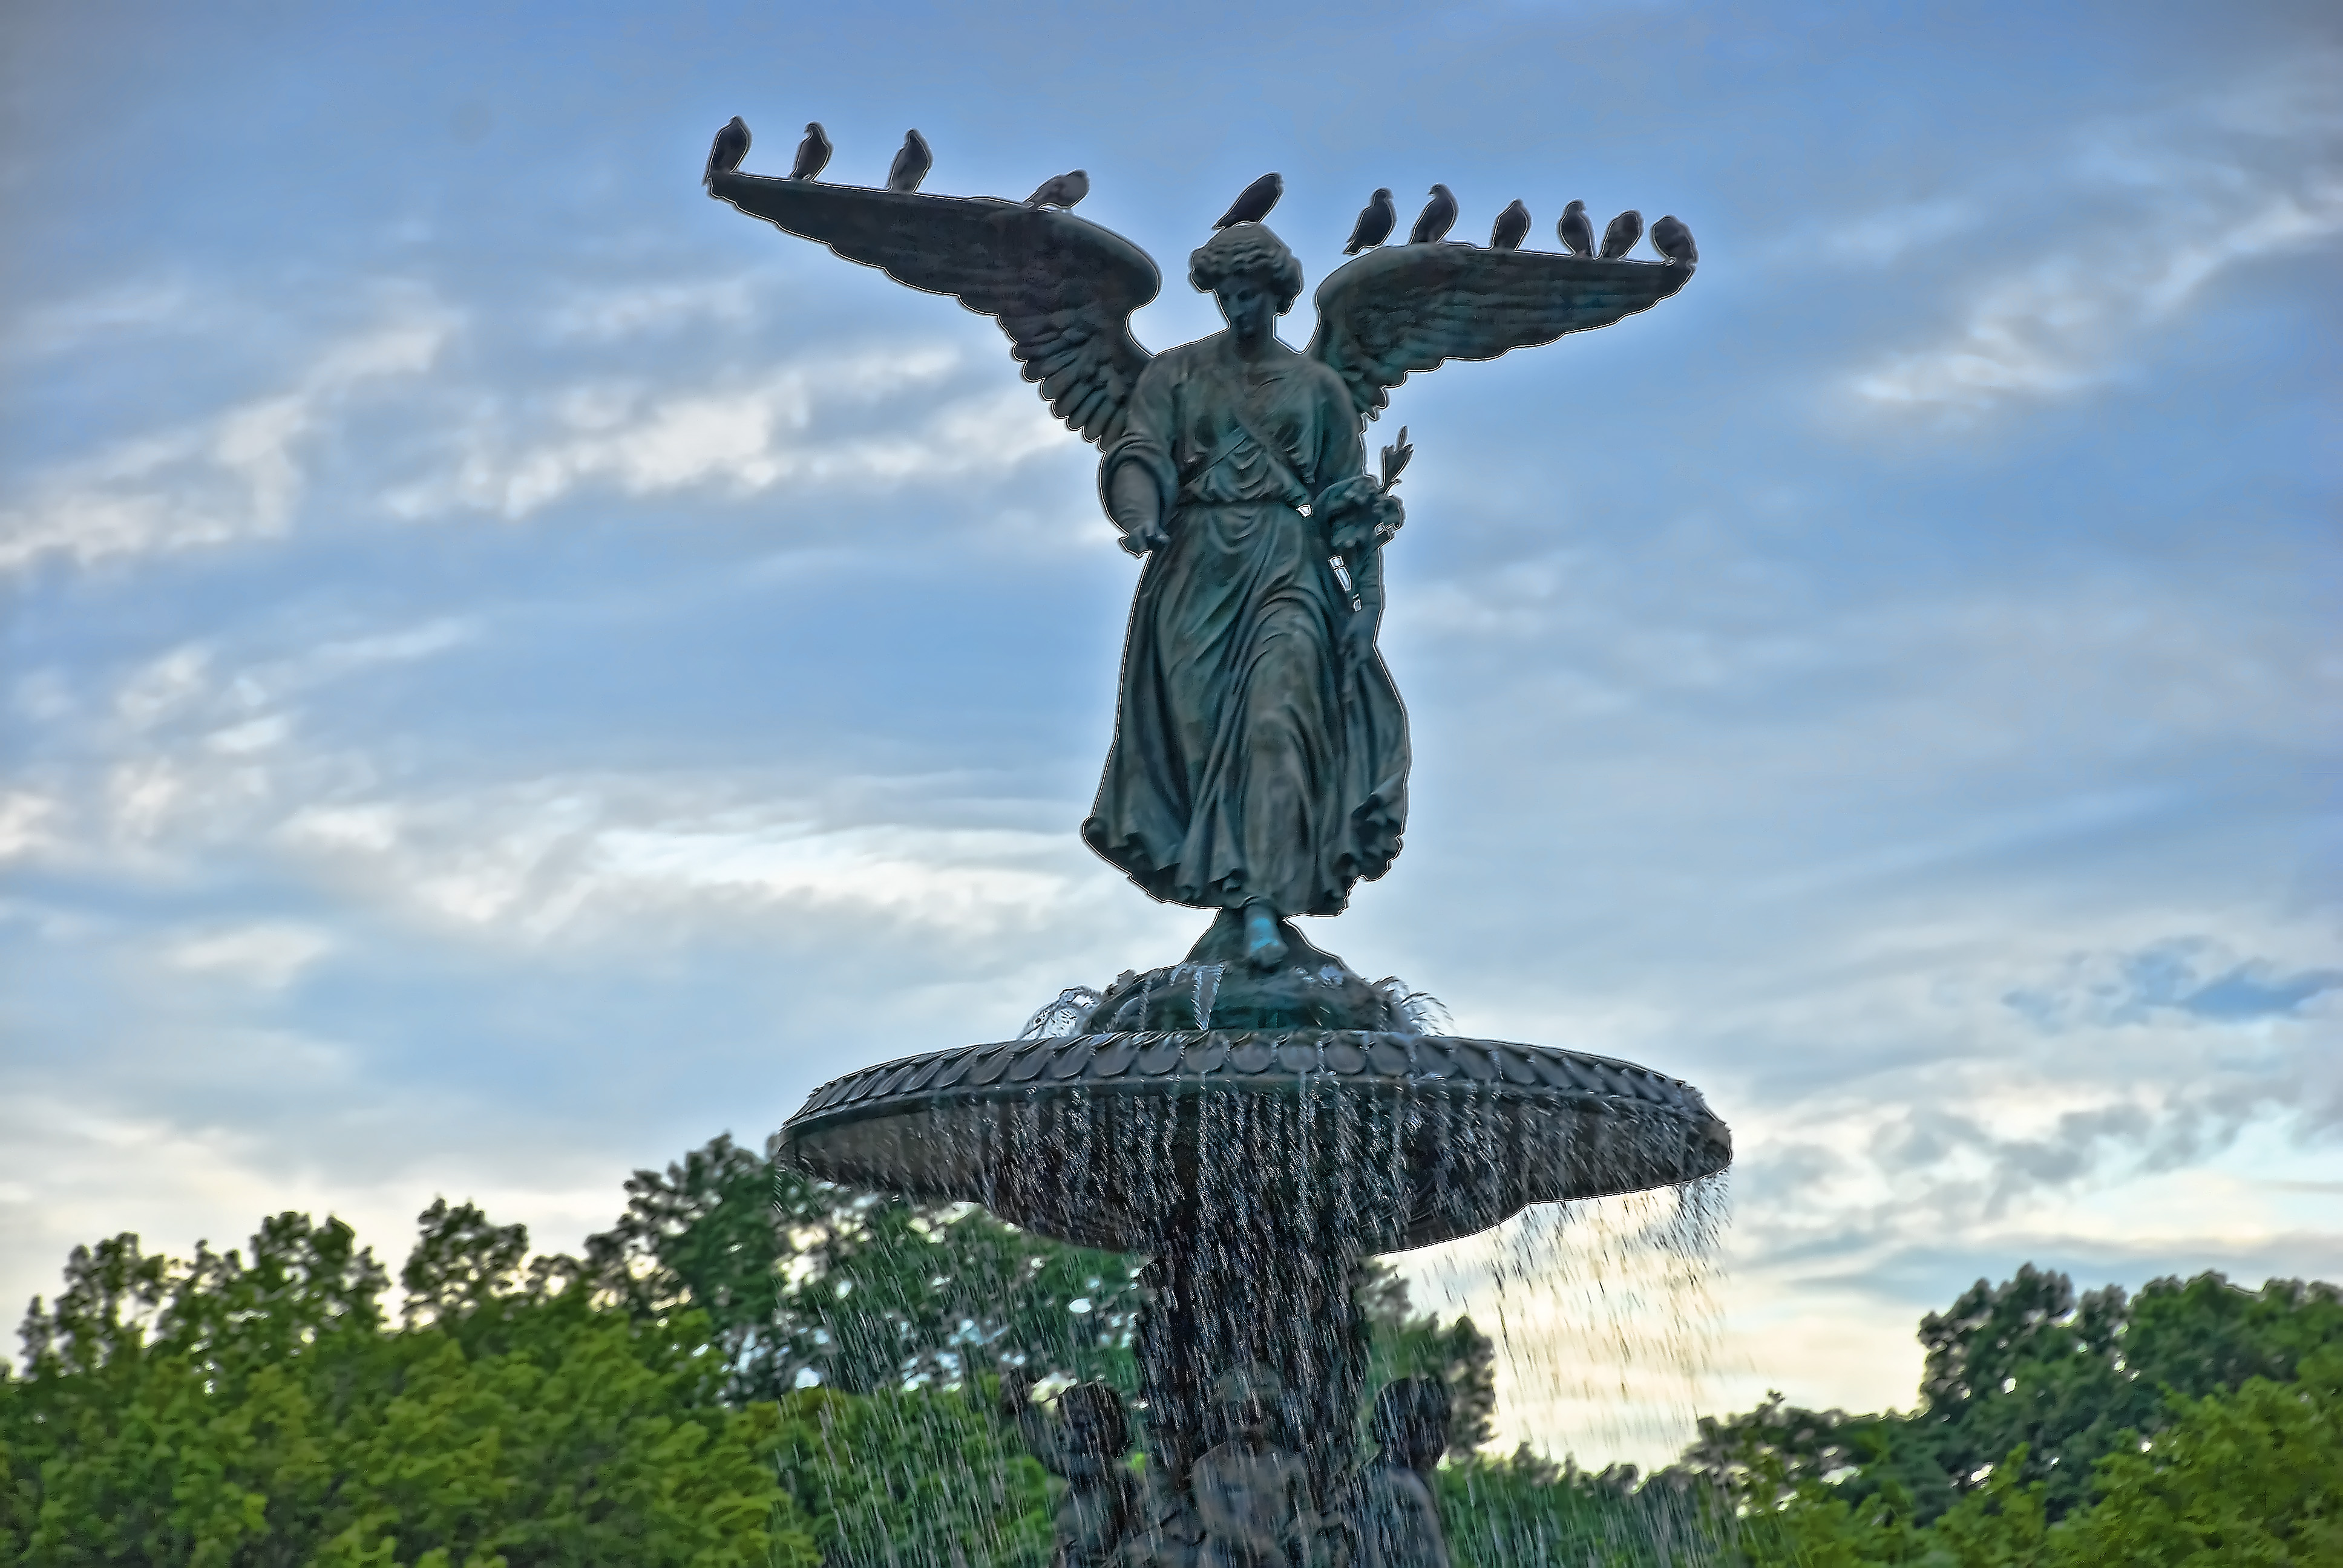 Angel of the Waters (Bethesda Fountain) by Emma Stebbins